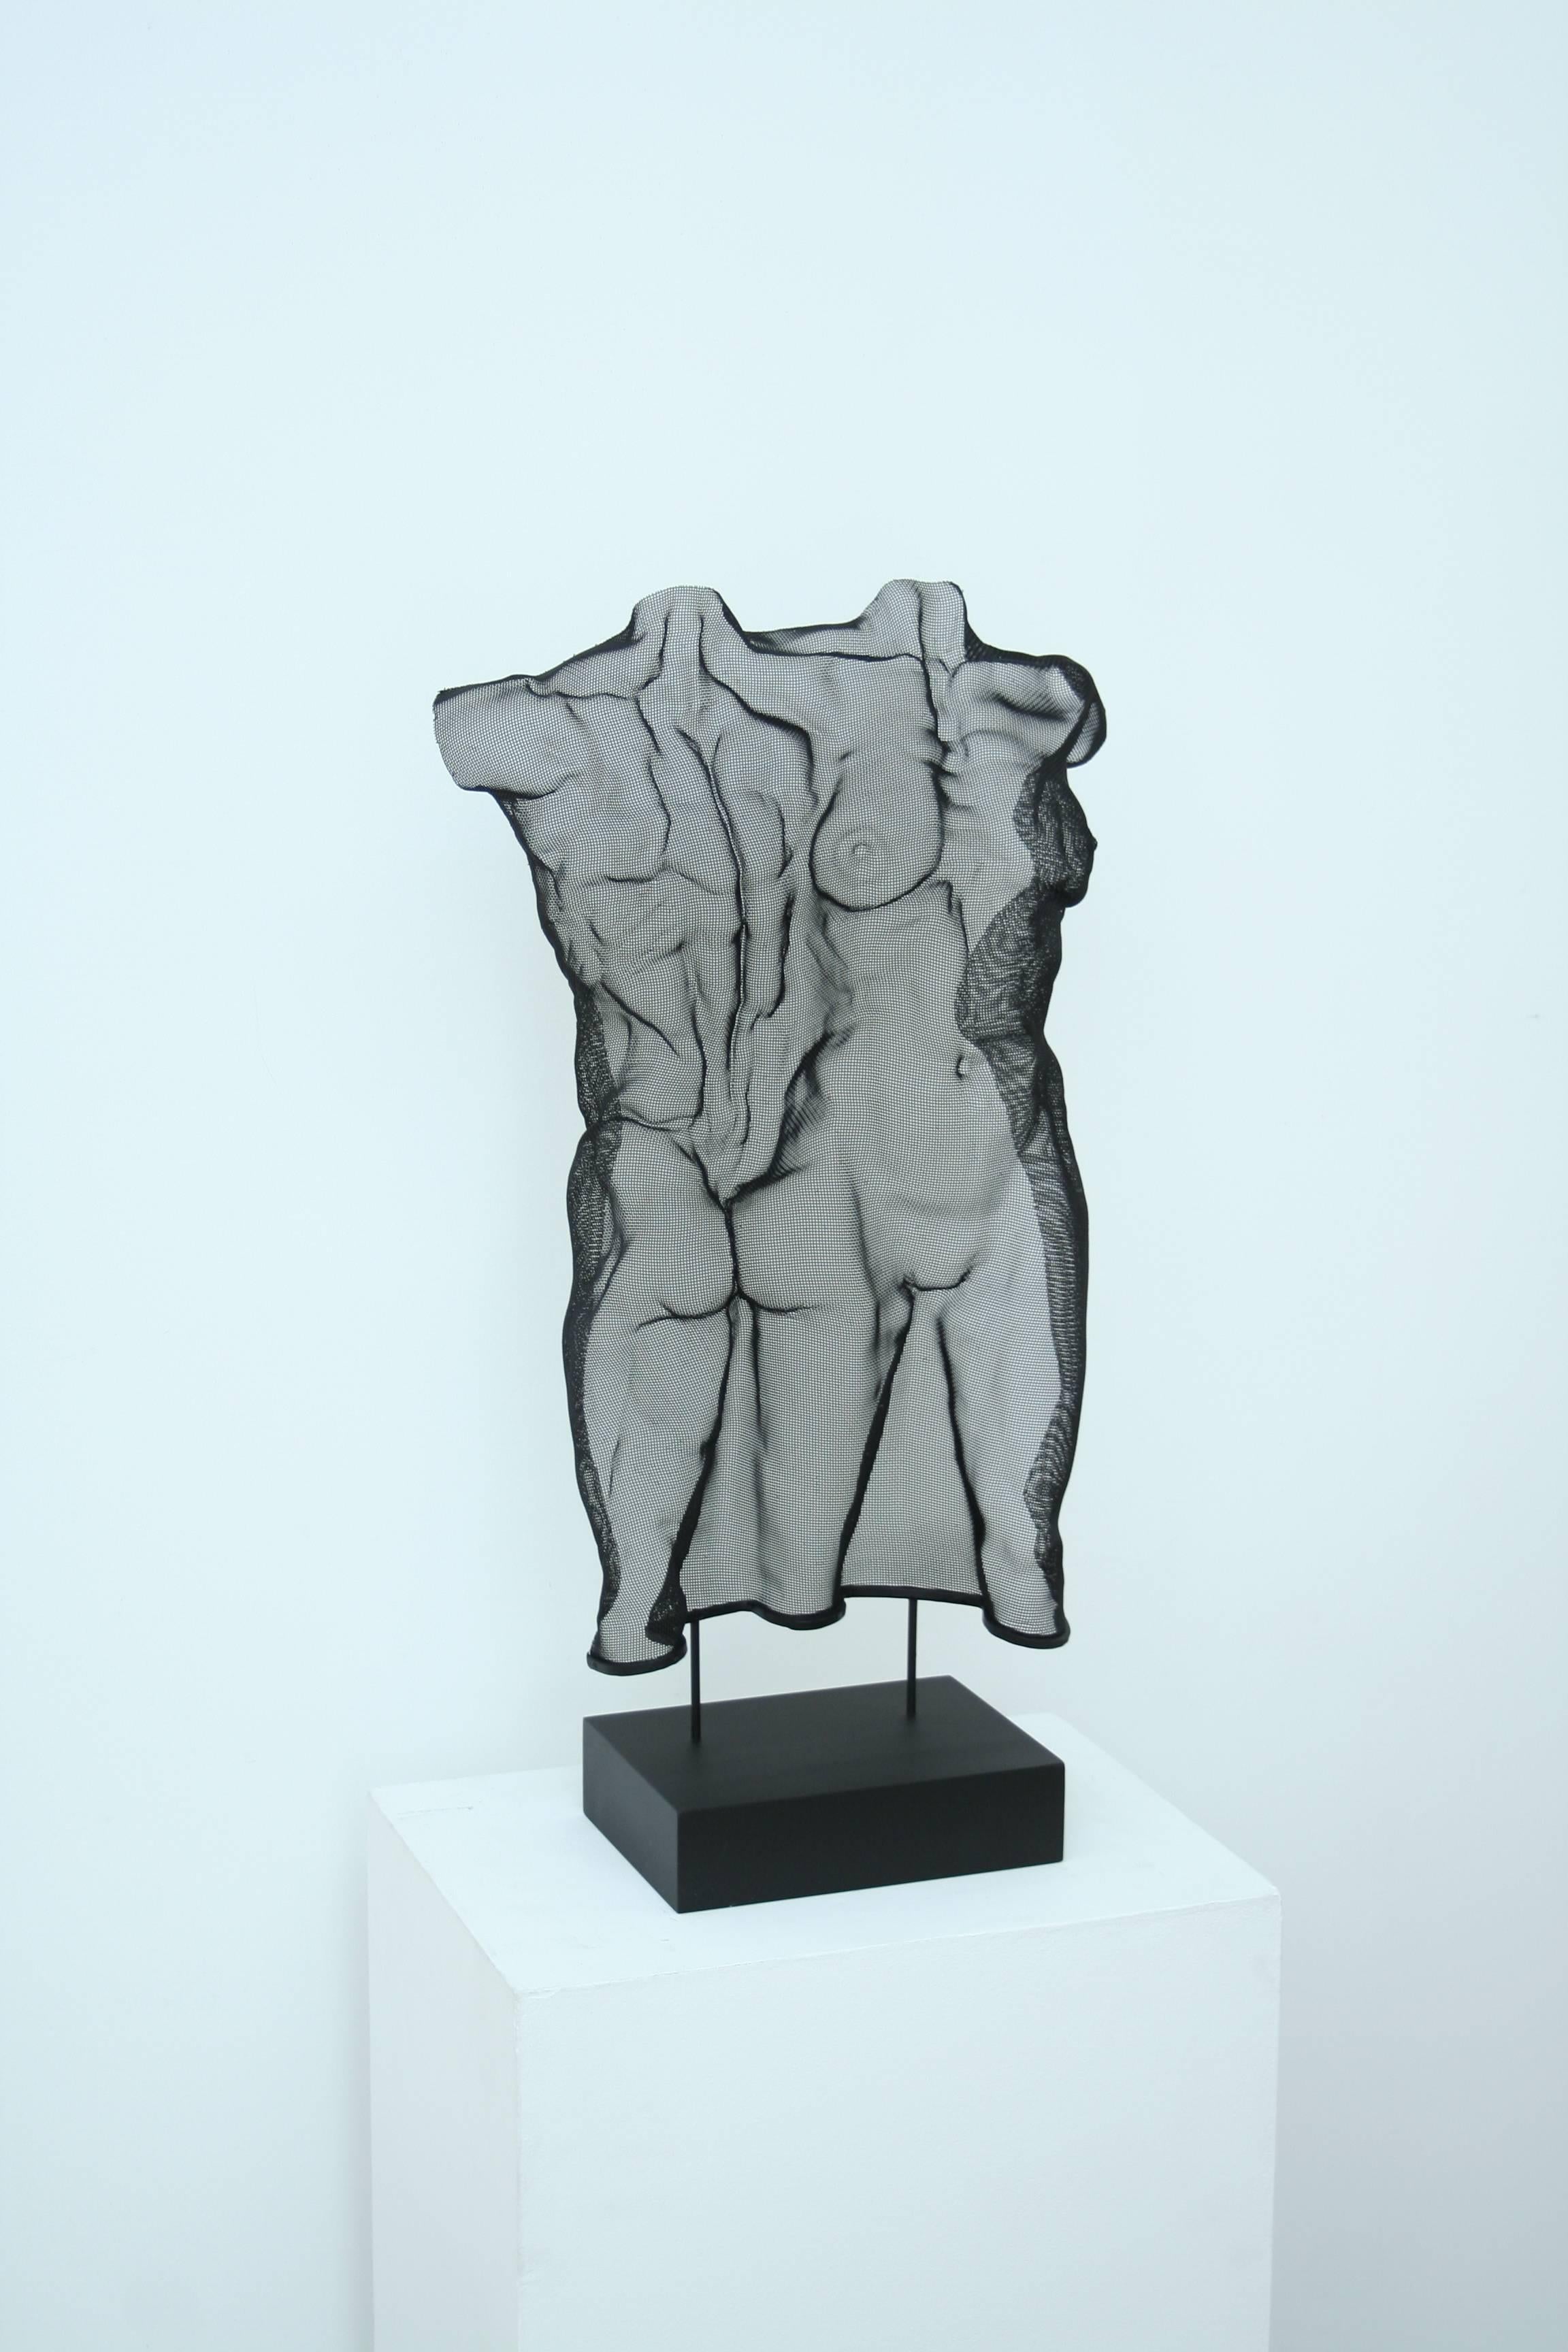 Born in Edinburgh, David Begbie studied at the capital's art school from which he emerged with a unique sculptural technique and the beginnings of a new visual language using steel-mesh.

Since his graduation in 1982 he has worked almost